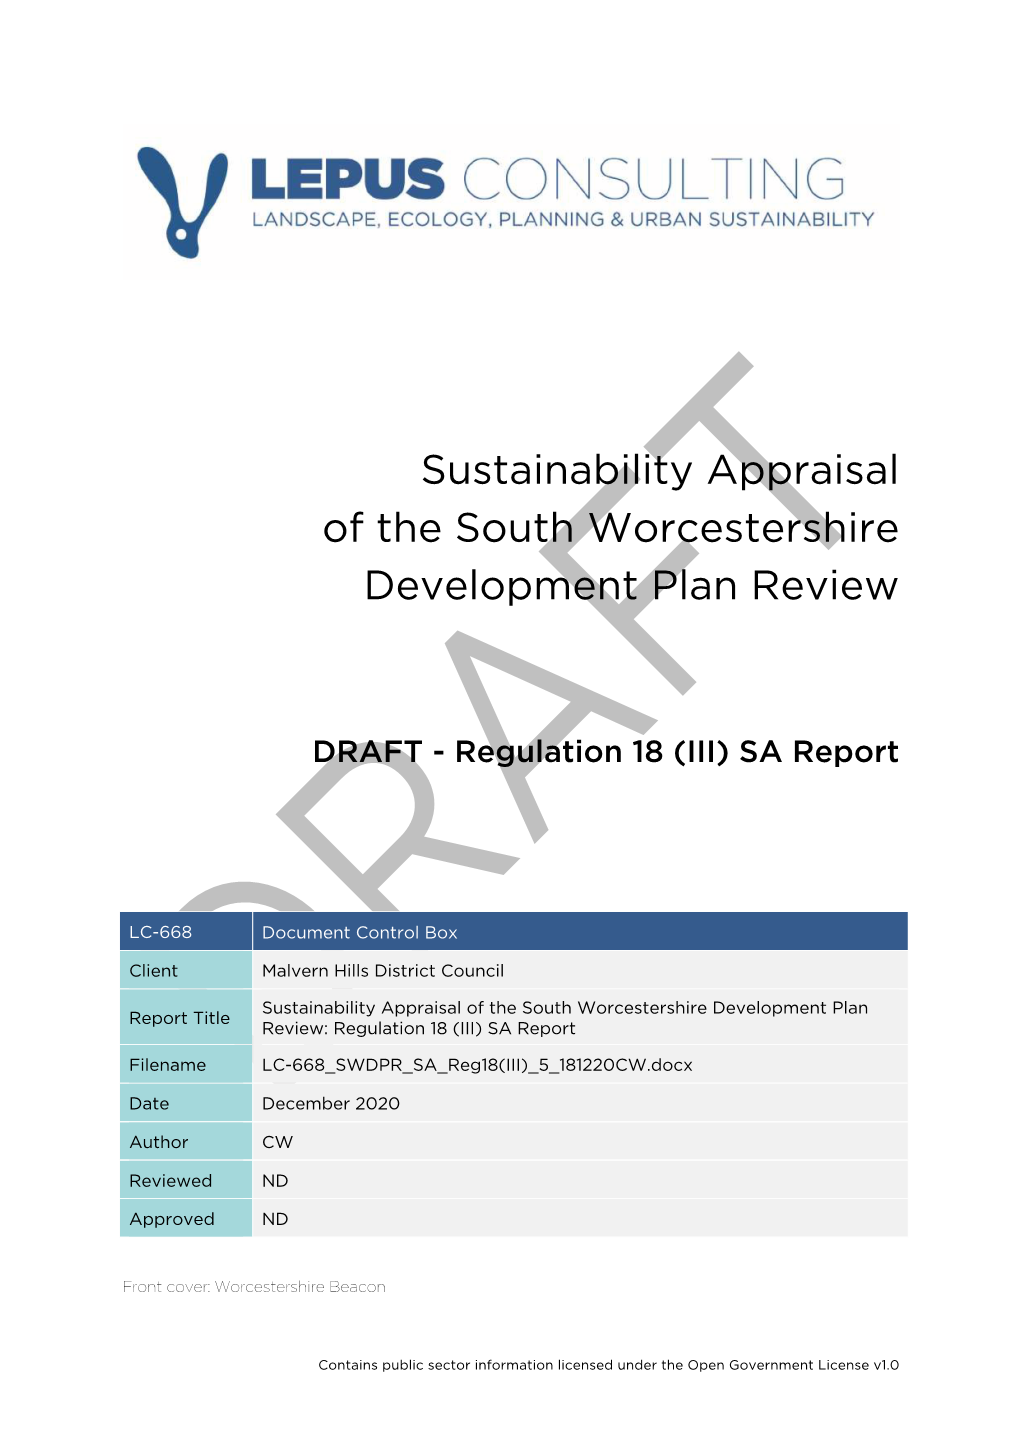 Sustainability Appraisal of the South Worcestershire Development Plan Review